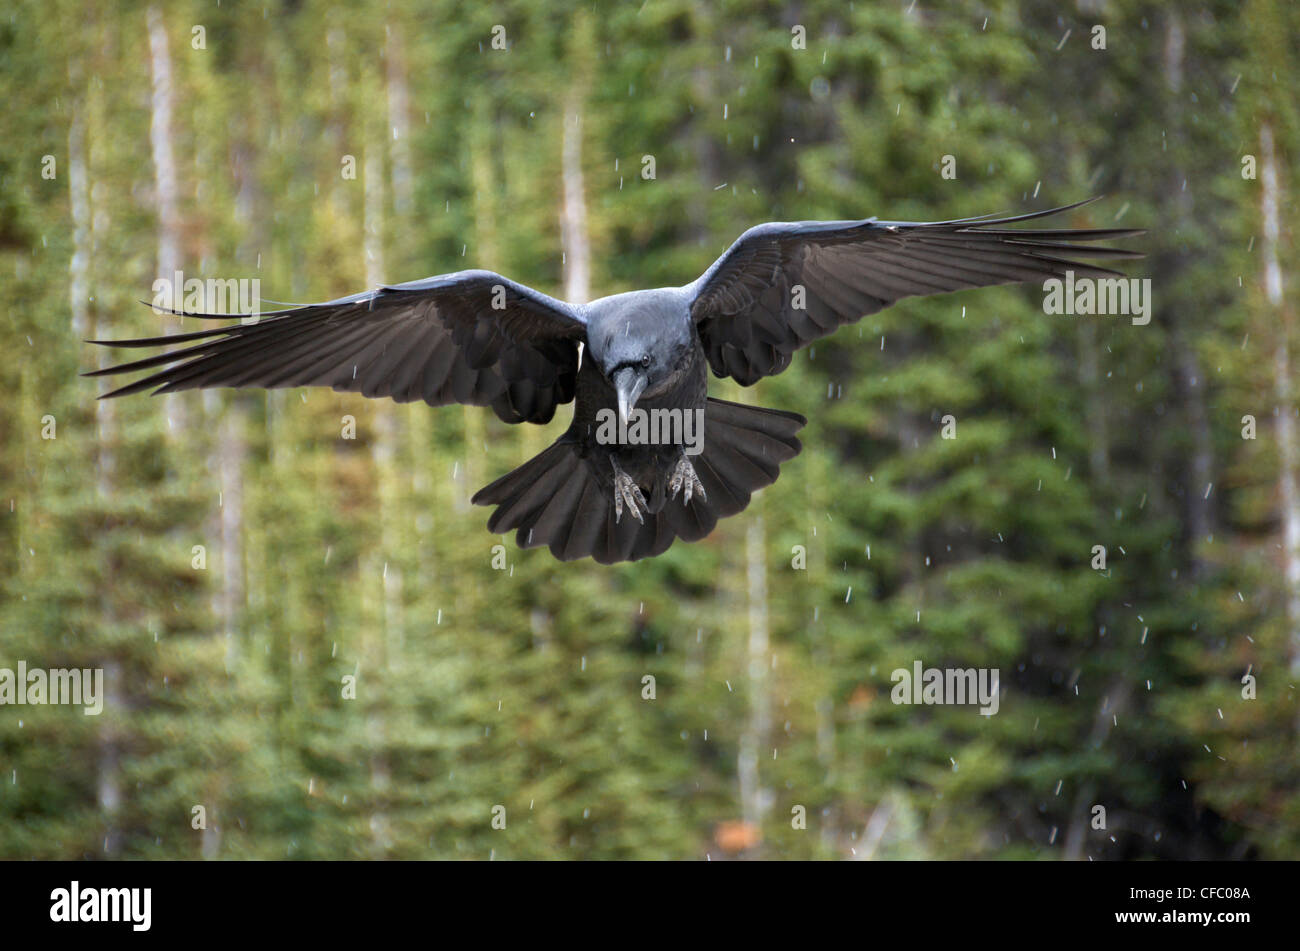 Adult Raven (Corvus corax) in flight with wings outstretched in a Boreal Forest, Alberta, Canada. Stock Photo